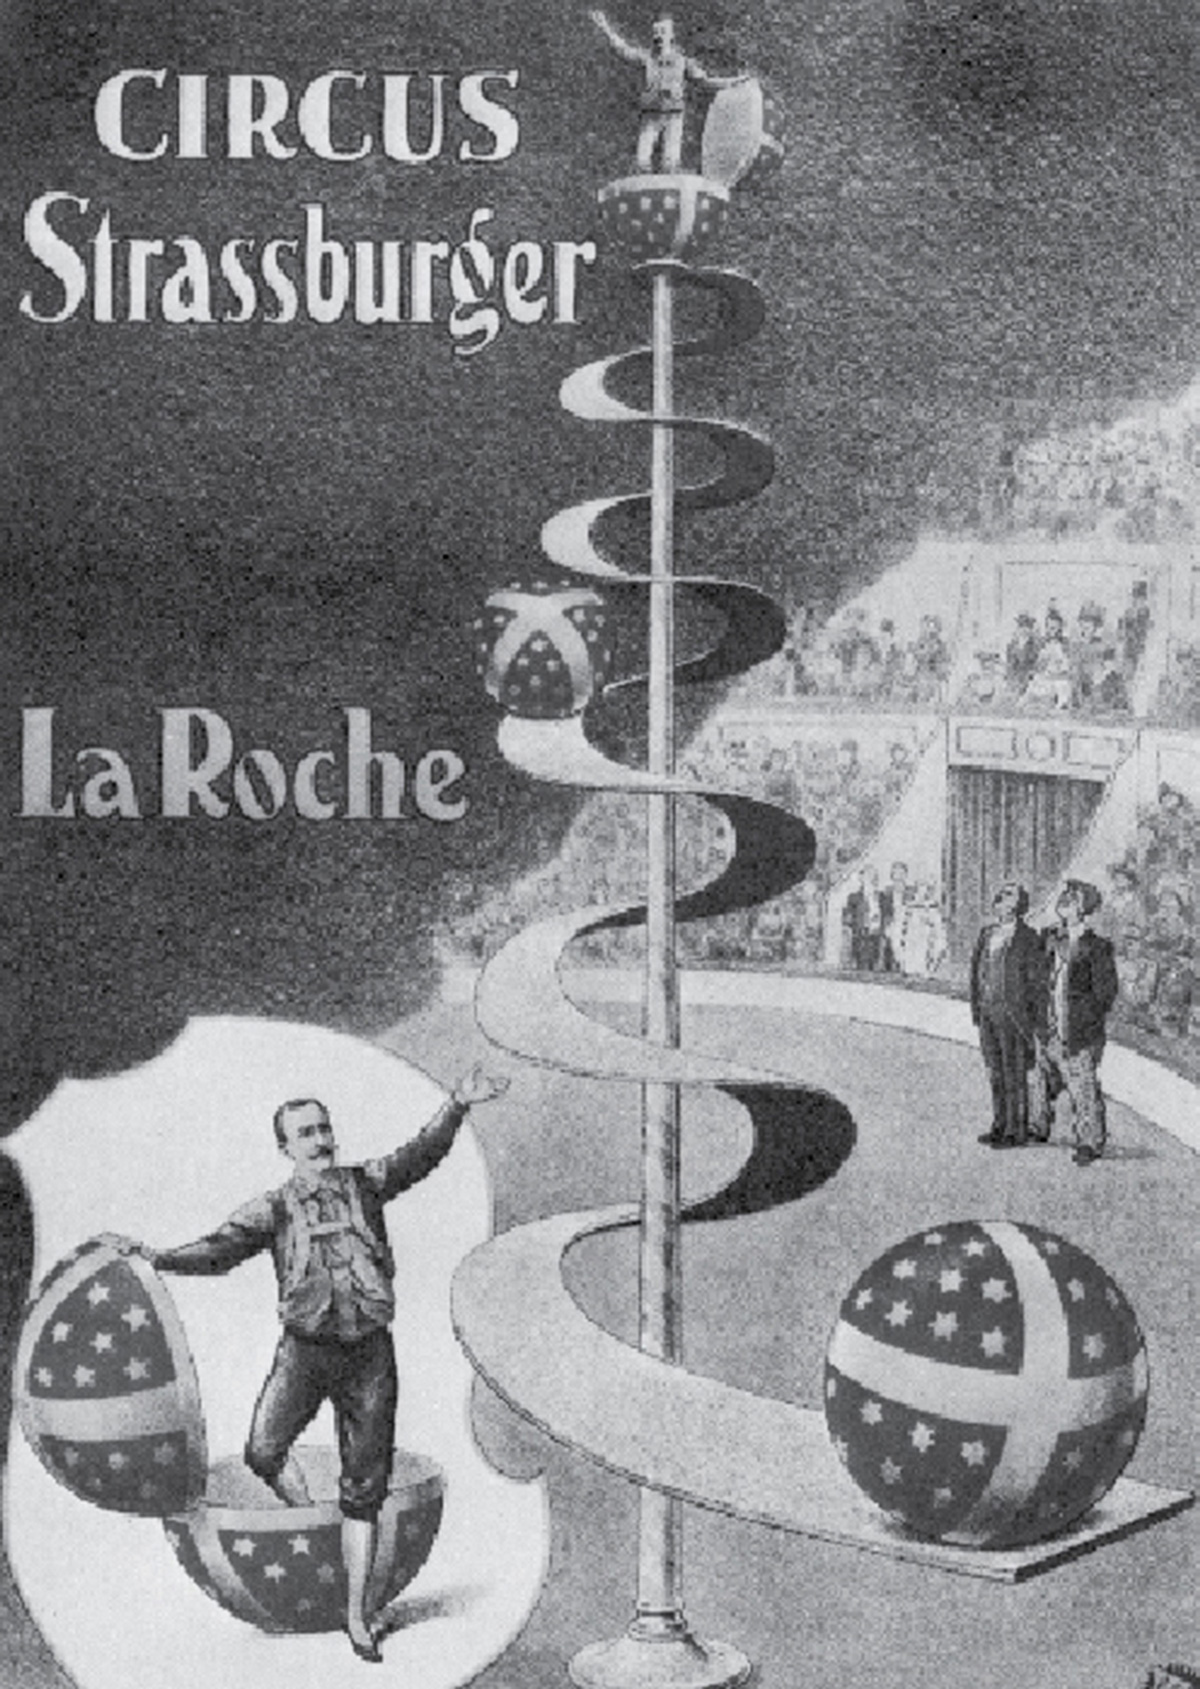 An illustrated poster for LaRoche’s act at Circus Strassburger.